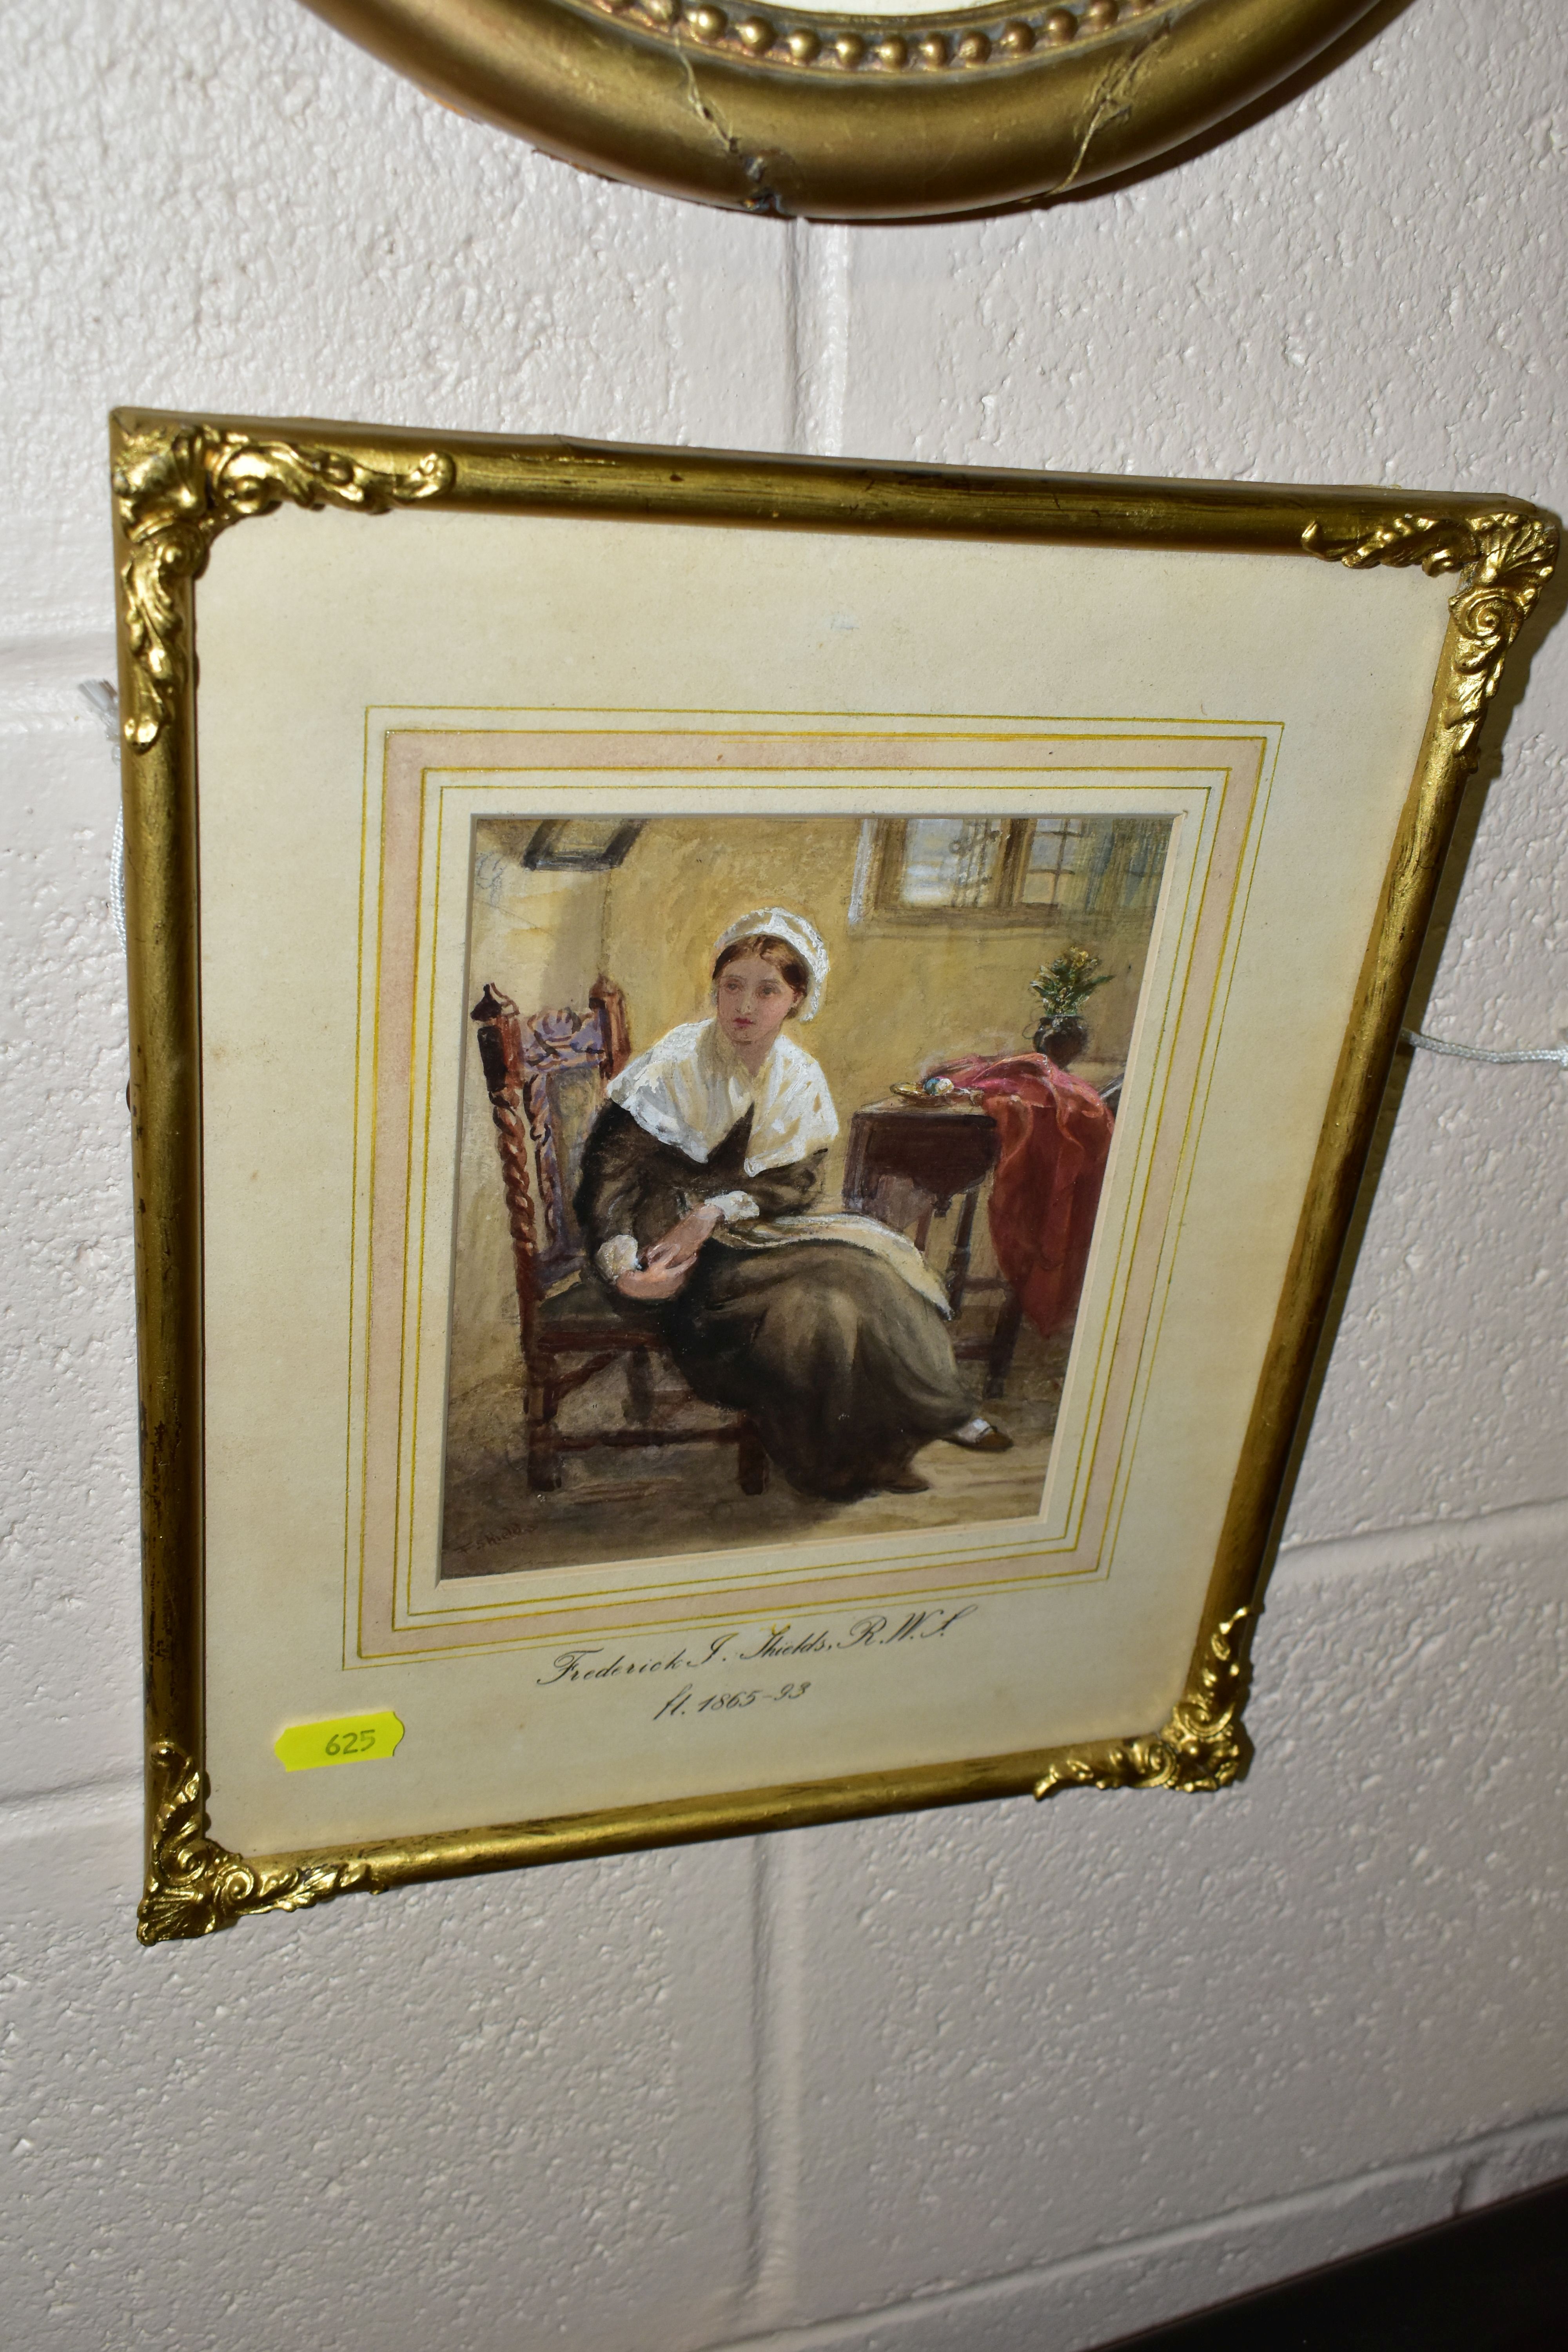 F. SHIELDS, A VICTORIAN LADY IS SITTING IN A CHAIR BESIDE A TABLE, signed F. Shields bottom left, - Image 3 of 3